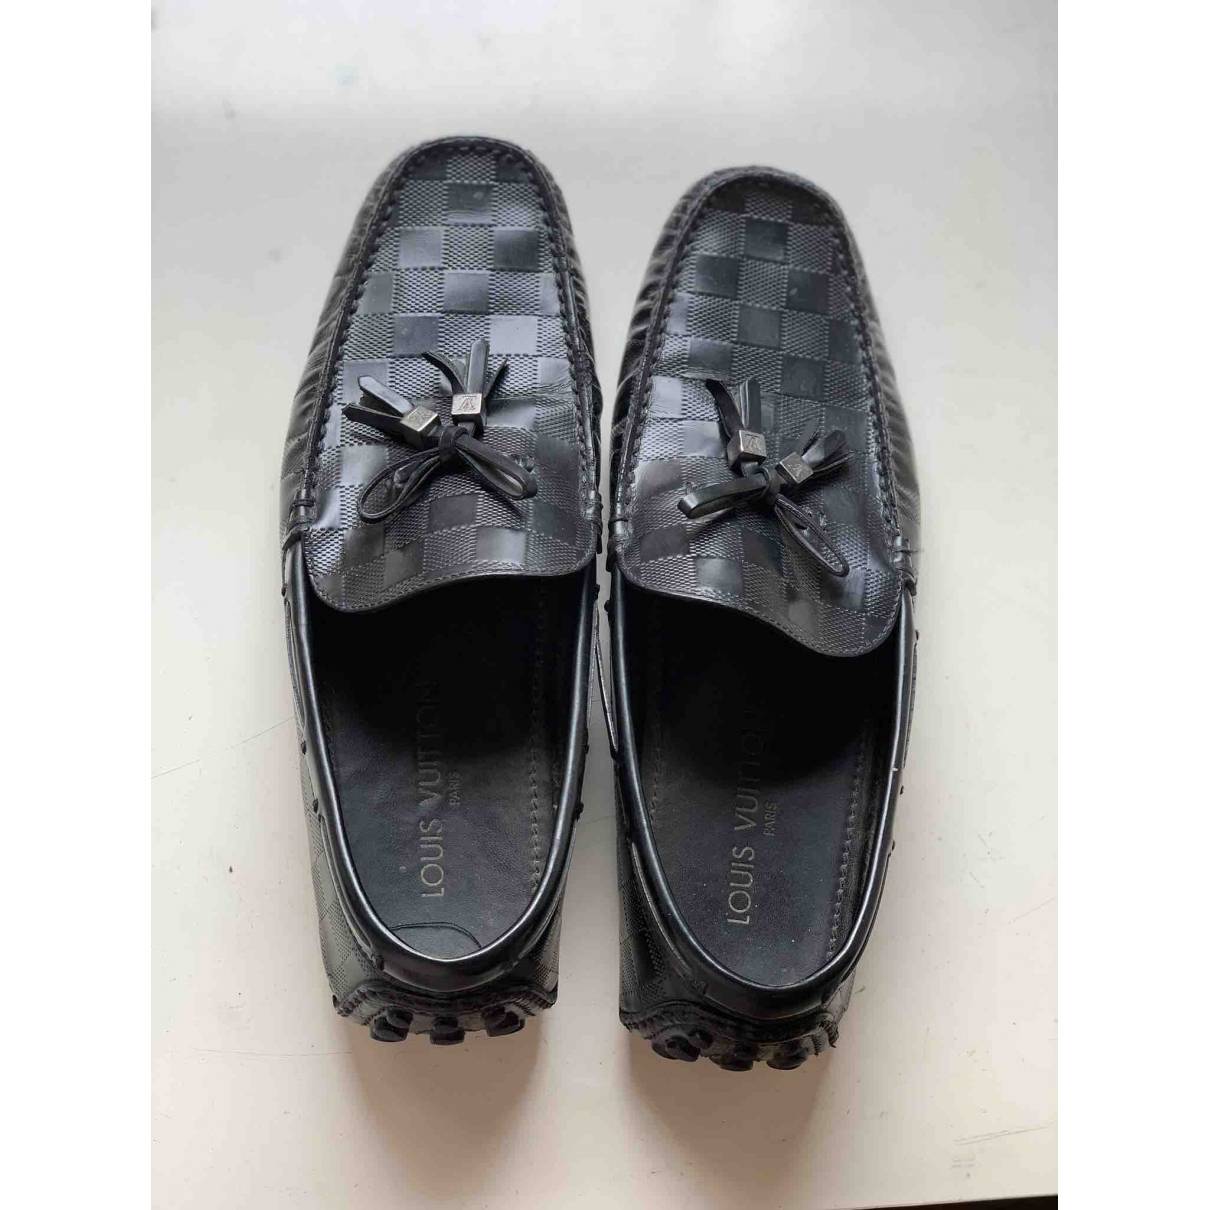 Louis Vuitton Hockenheim Men's Loafers Shoes Size 10 for Sale in